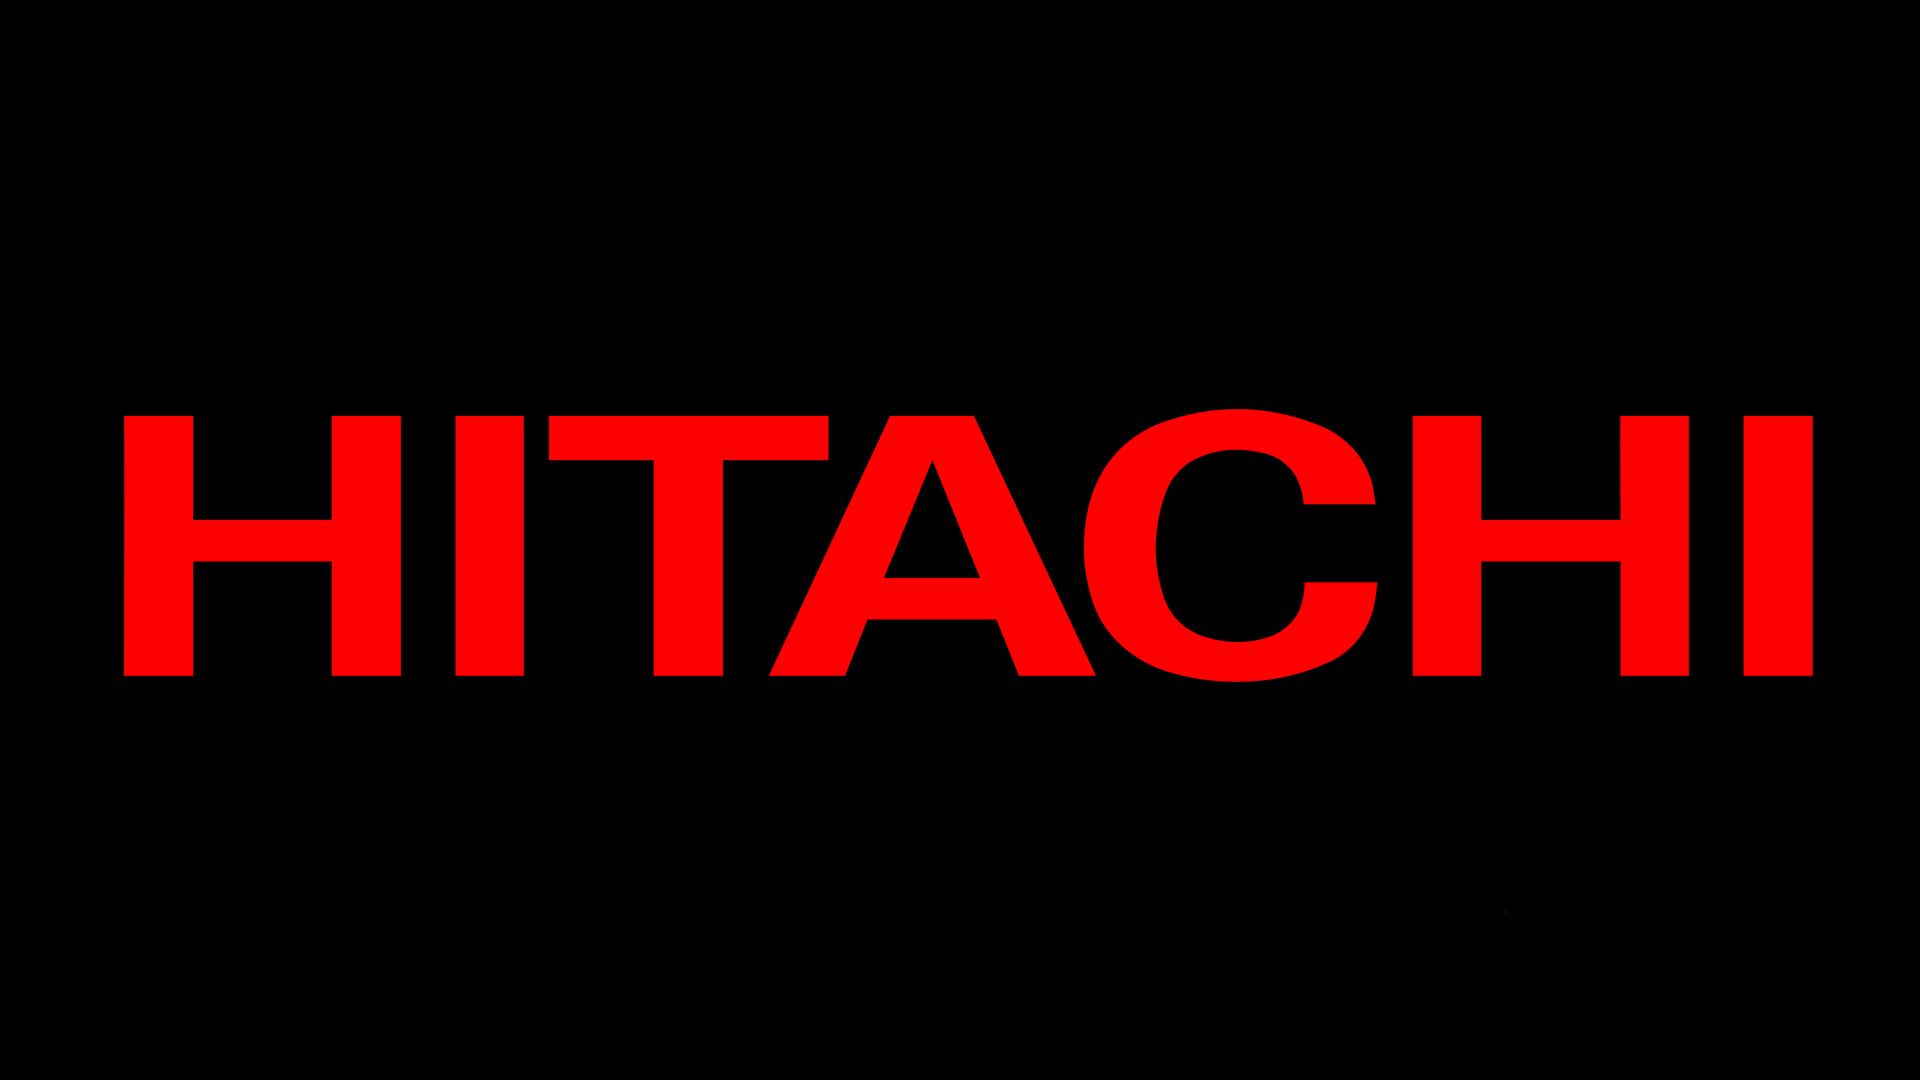 Hitachi Logo - Hitachi Logo, Hitachi Symbol, Meaning, History and Evolution